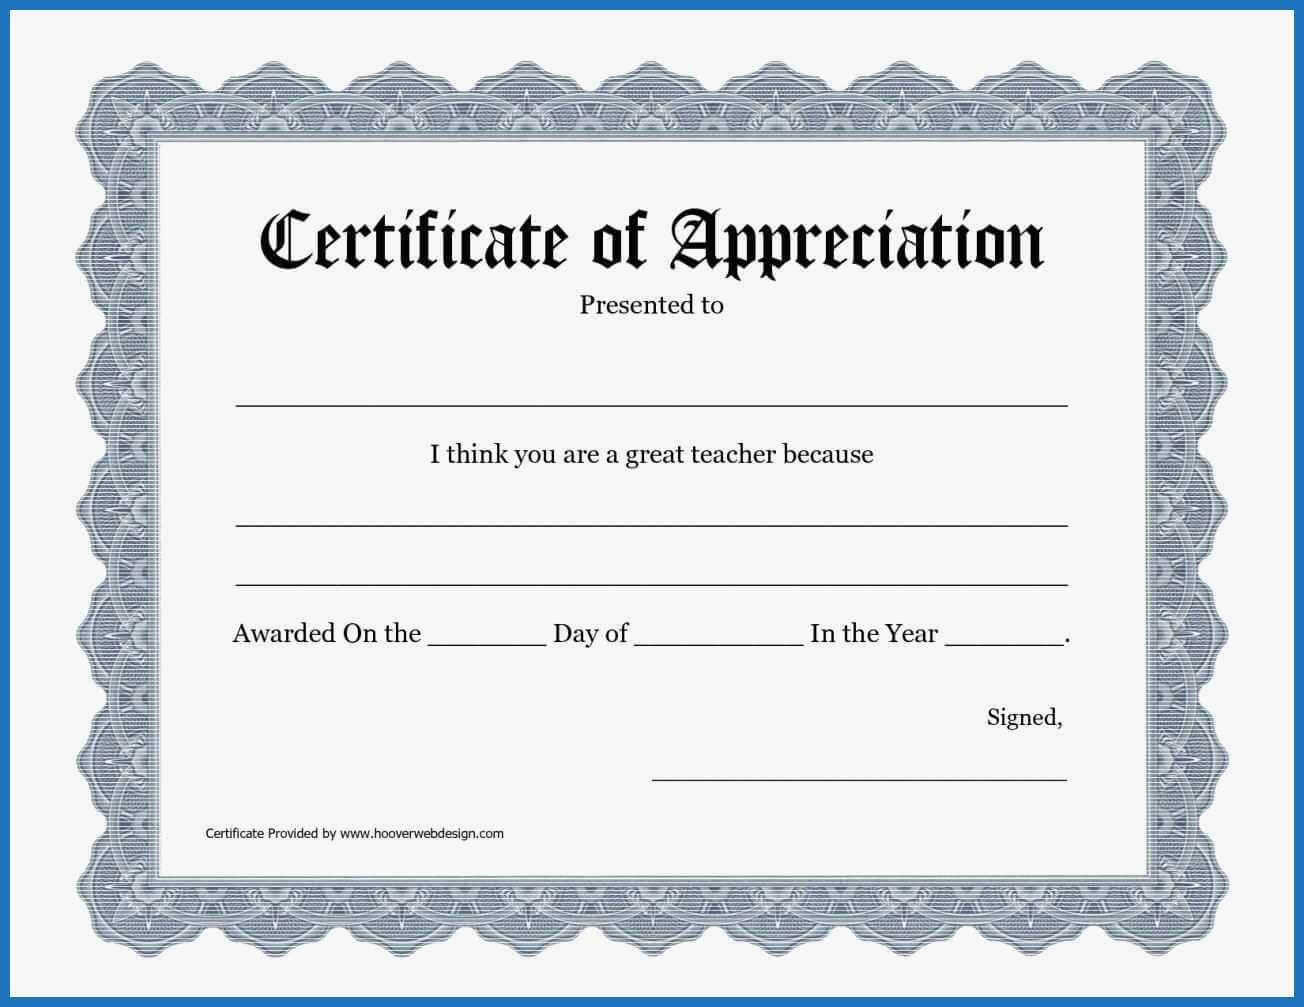 014 Recognition Certificate Templatee Ideas Of Appreciation Regarding Free Template For Certificate Of Recognition